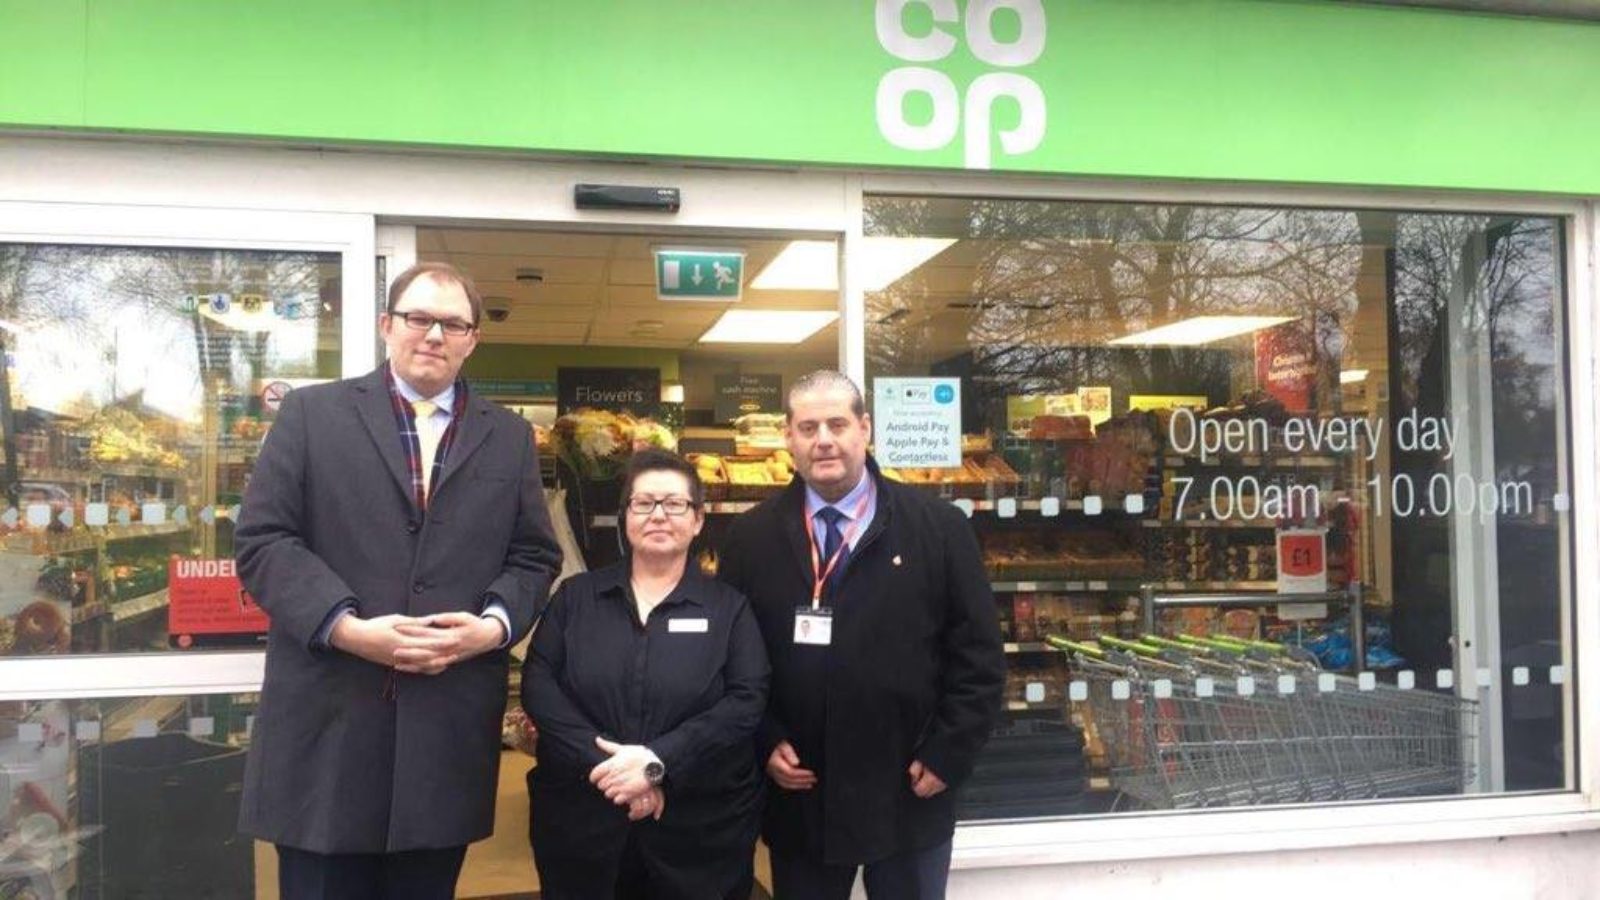 Gareth outside the Co-Op store in Penkill with Debra an employee and Paul from Usdaw Union.